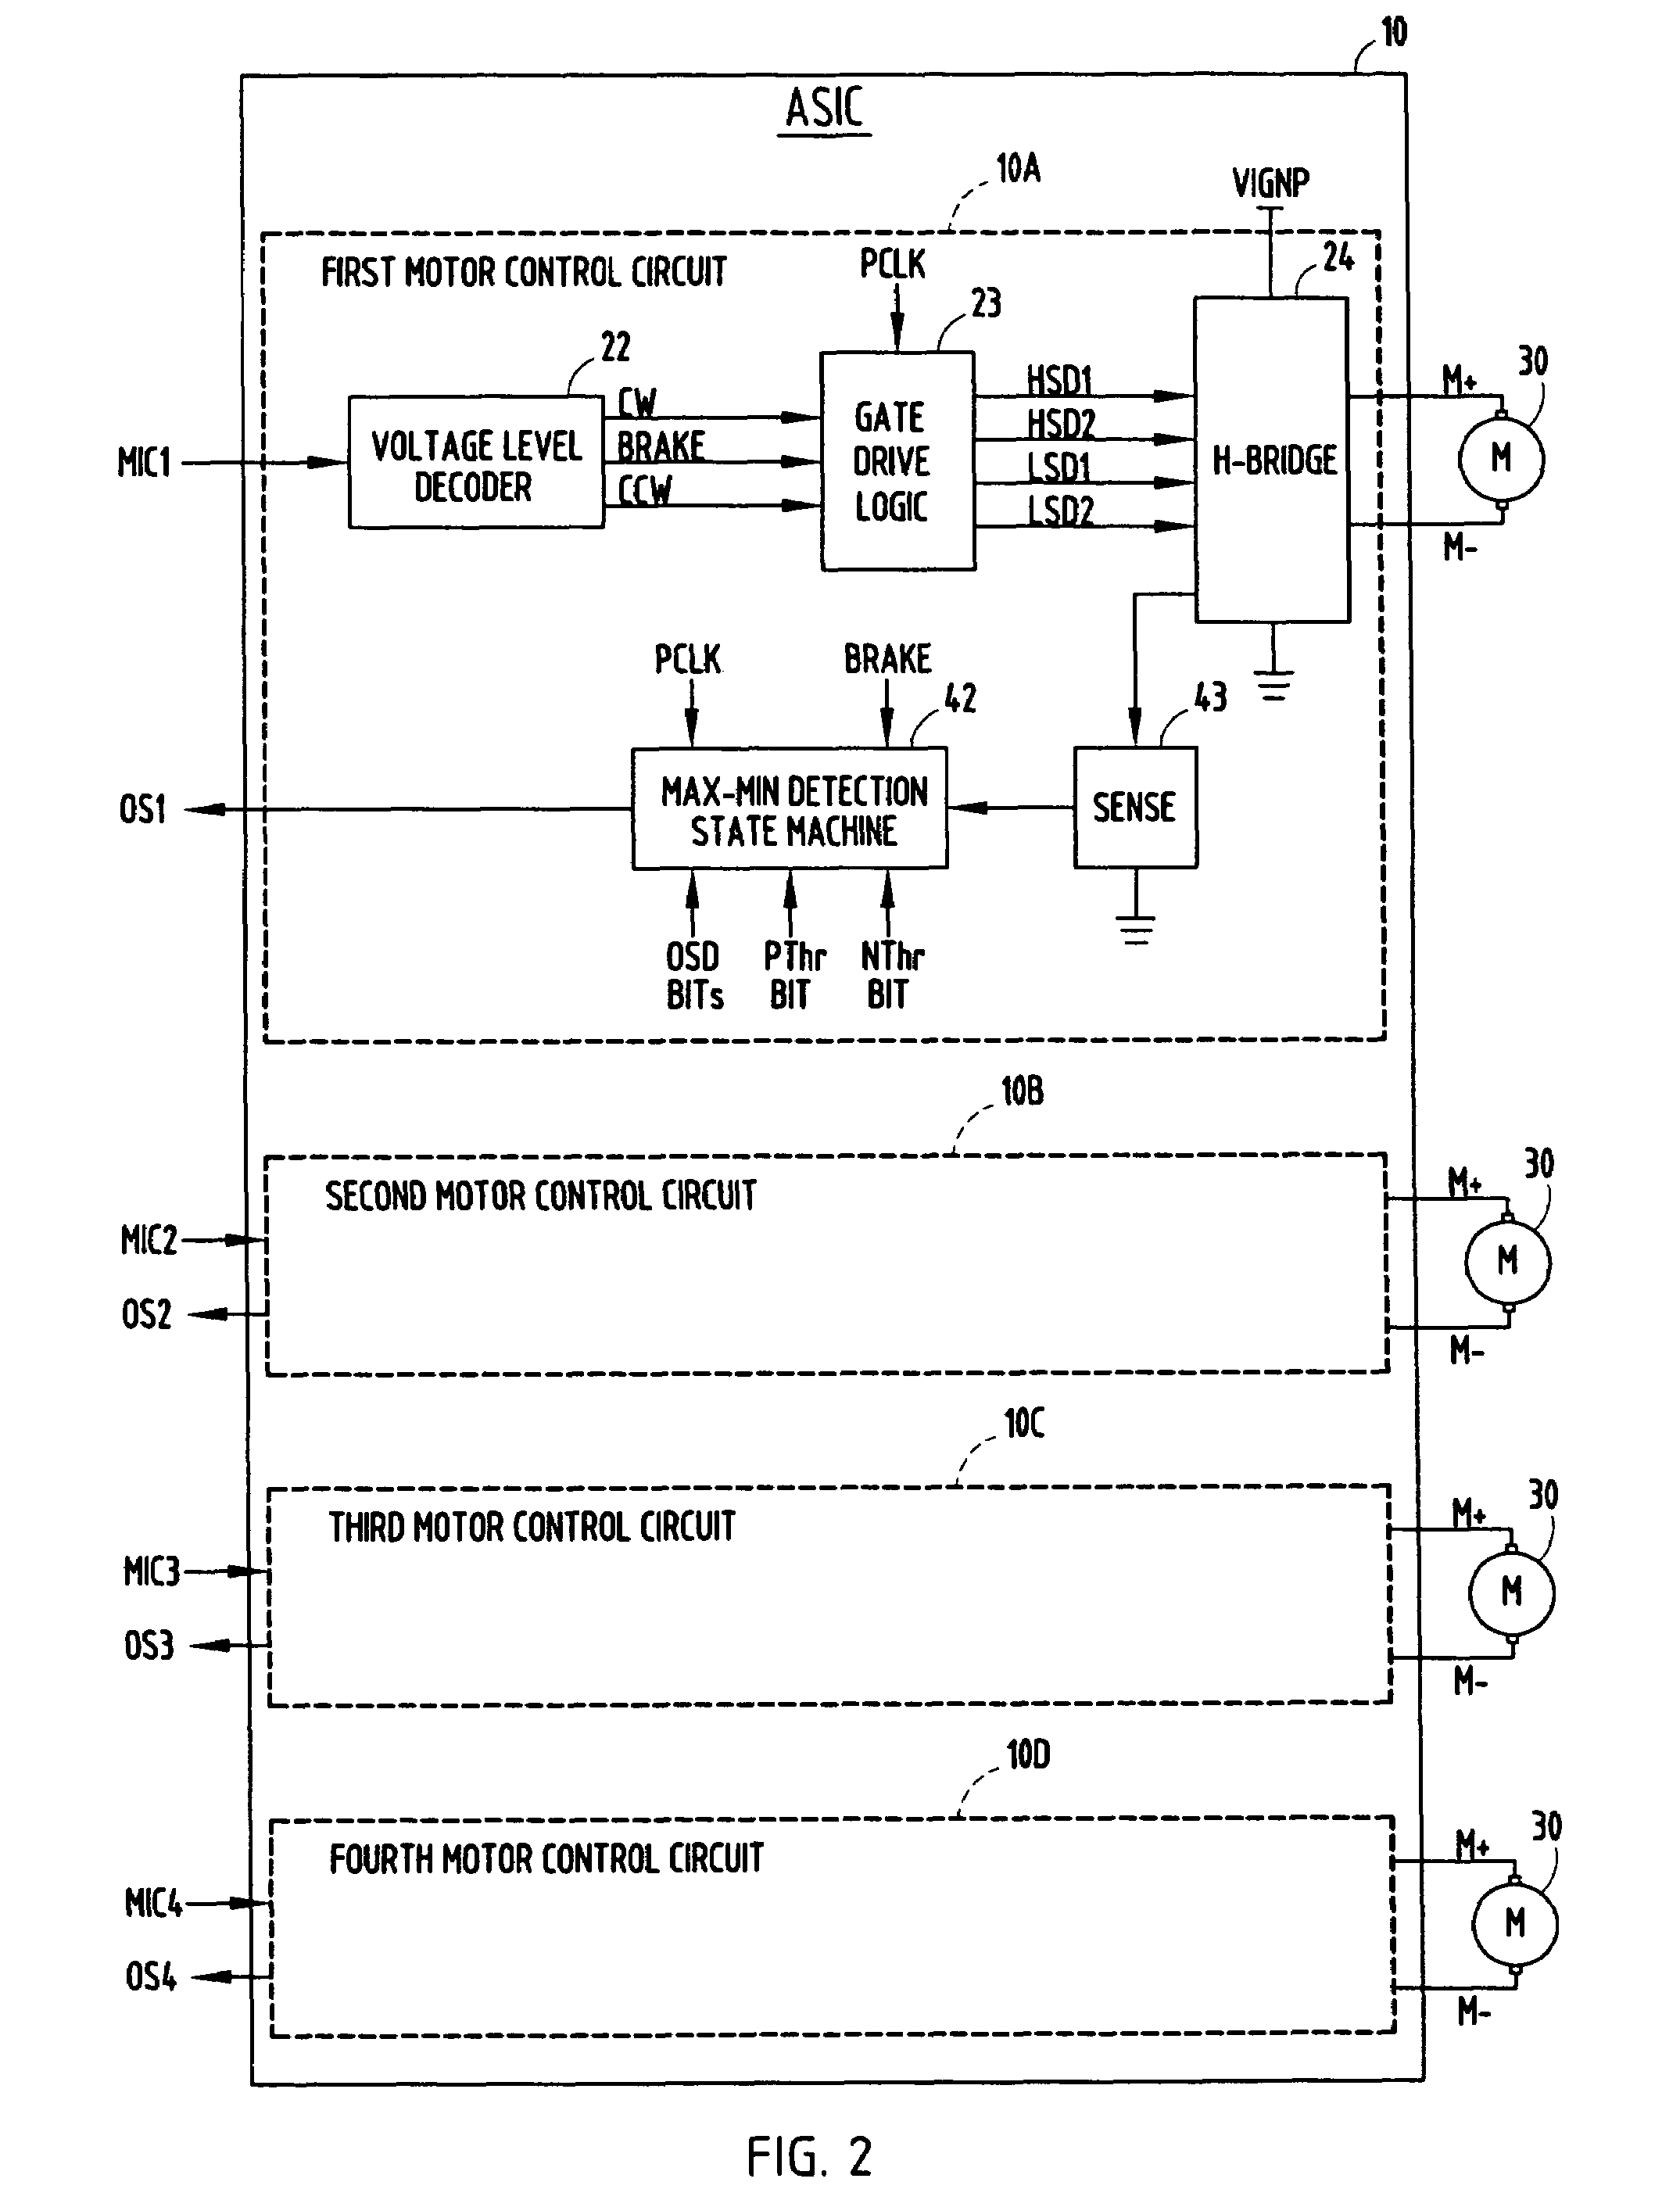 Voltage-sensitive oscillator frequency for rotor position detection scheme